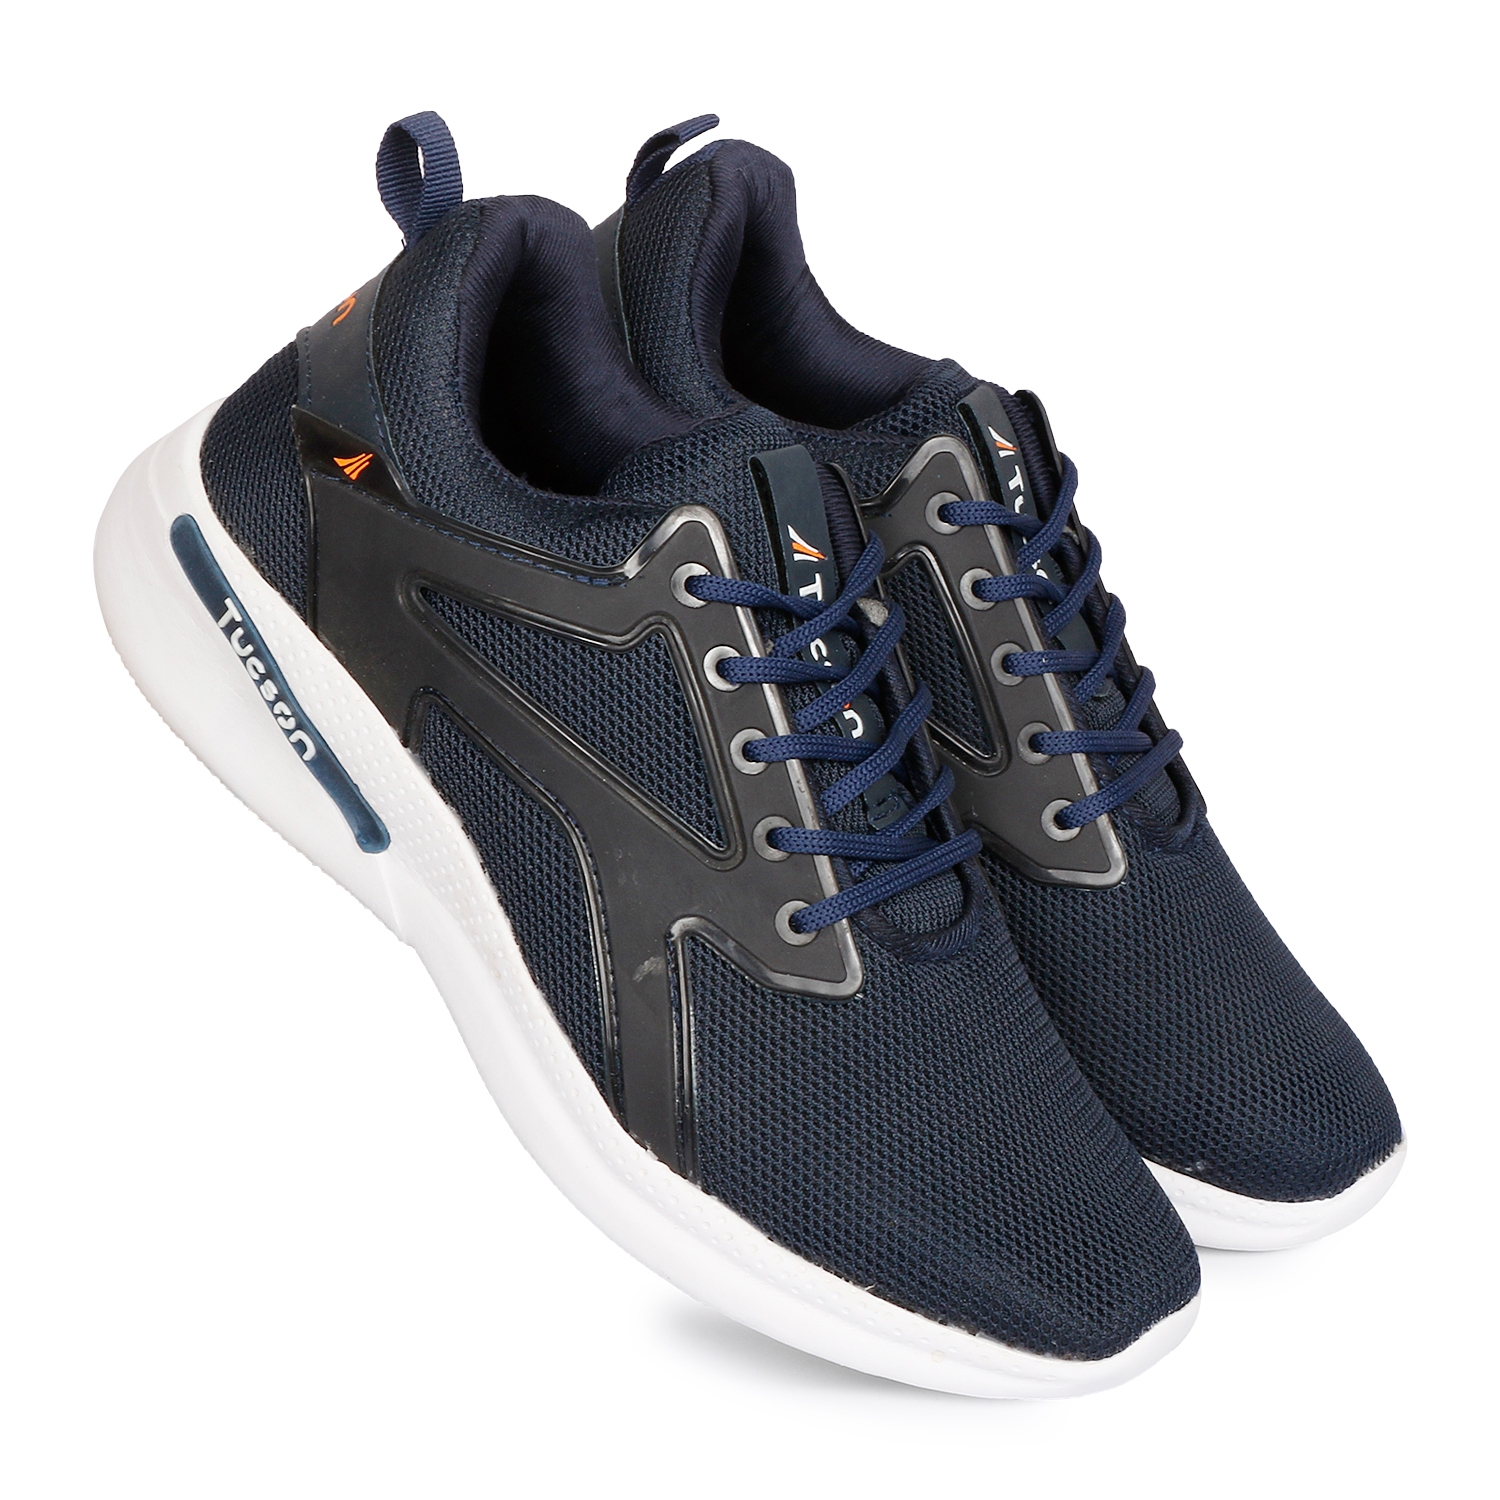 TUCSON - Navy & Green Running Shoes